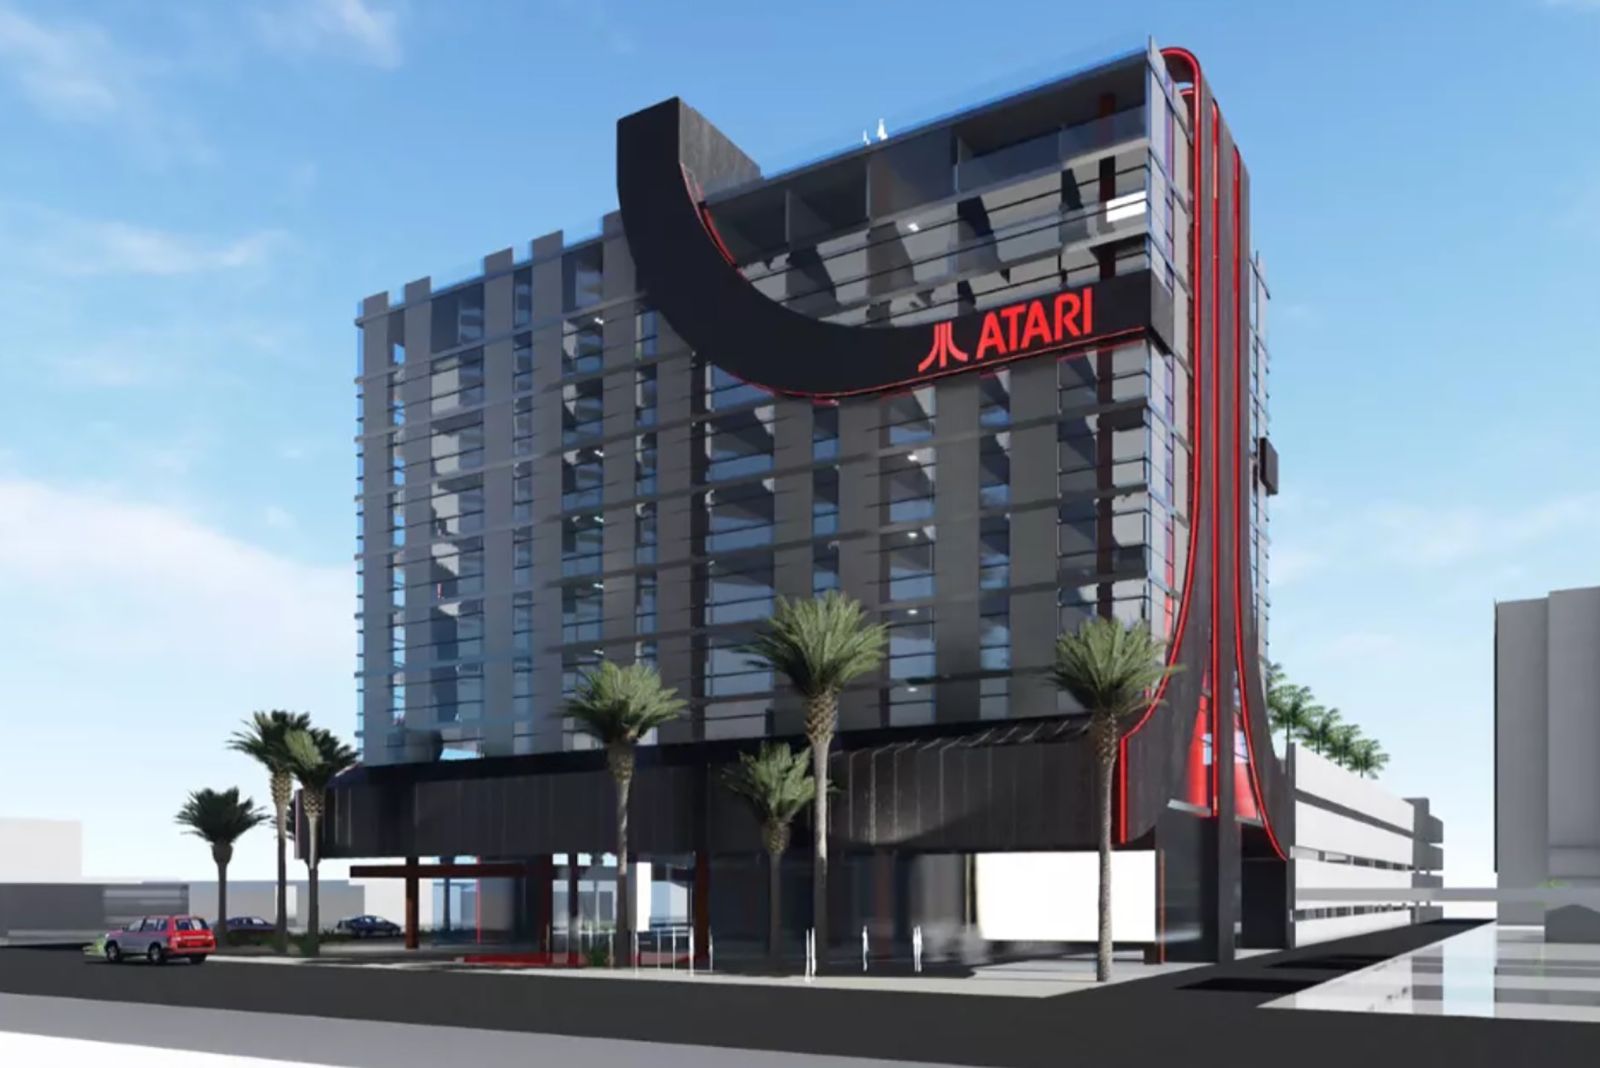 Atari-branded hotels for nostalgic gamers are coming to the US image 2